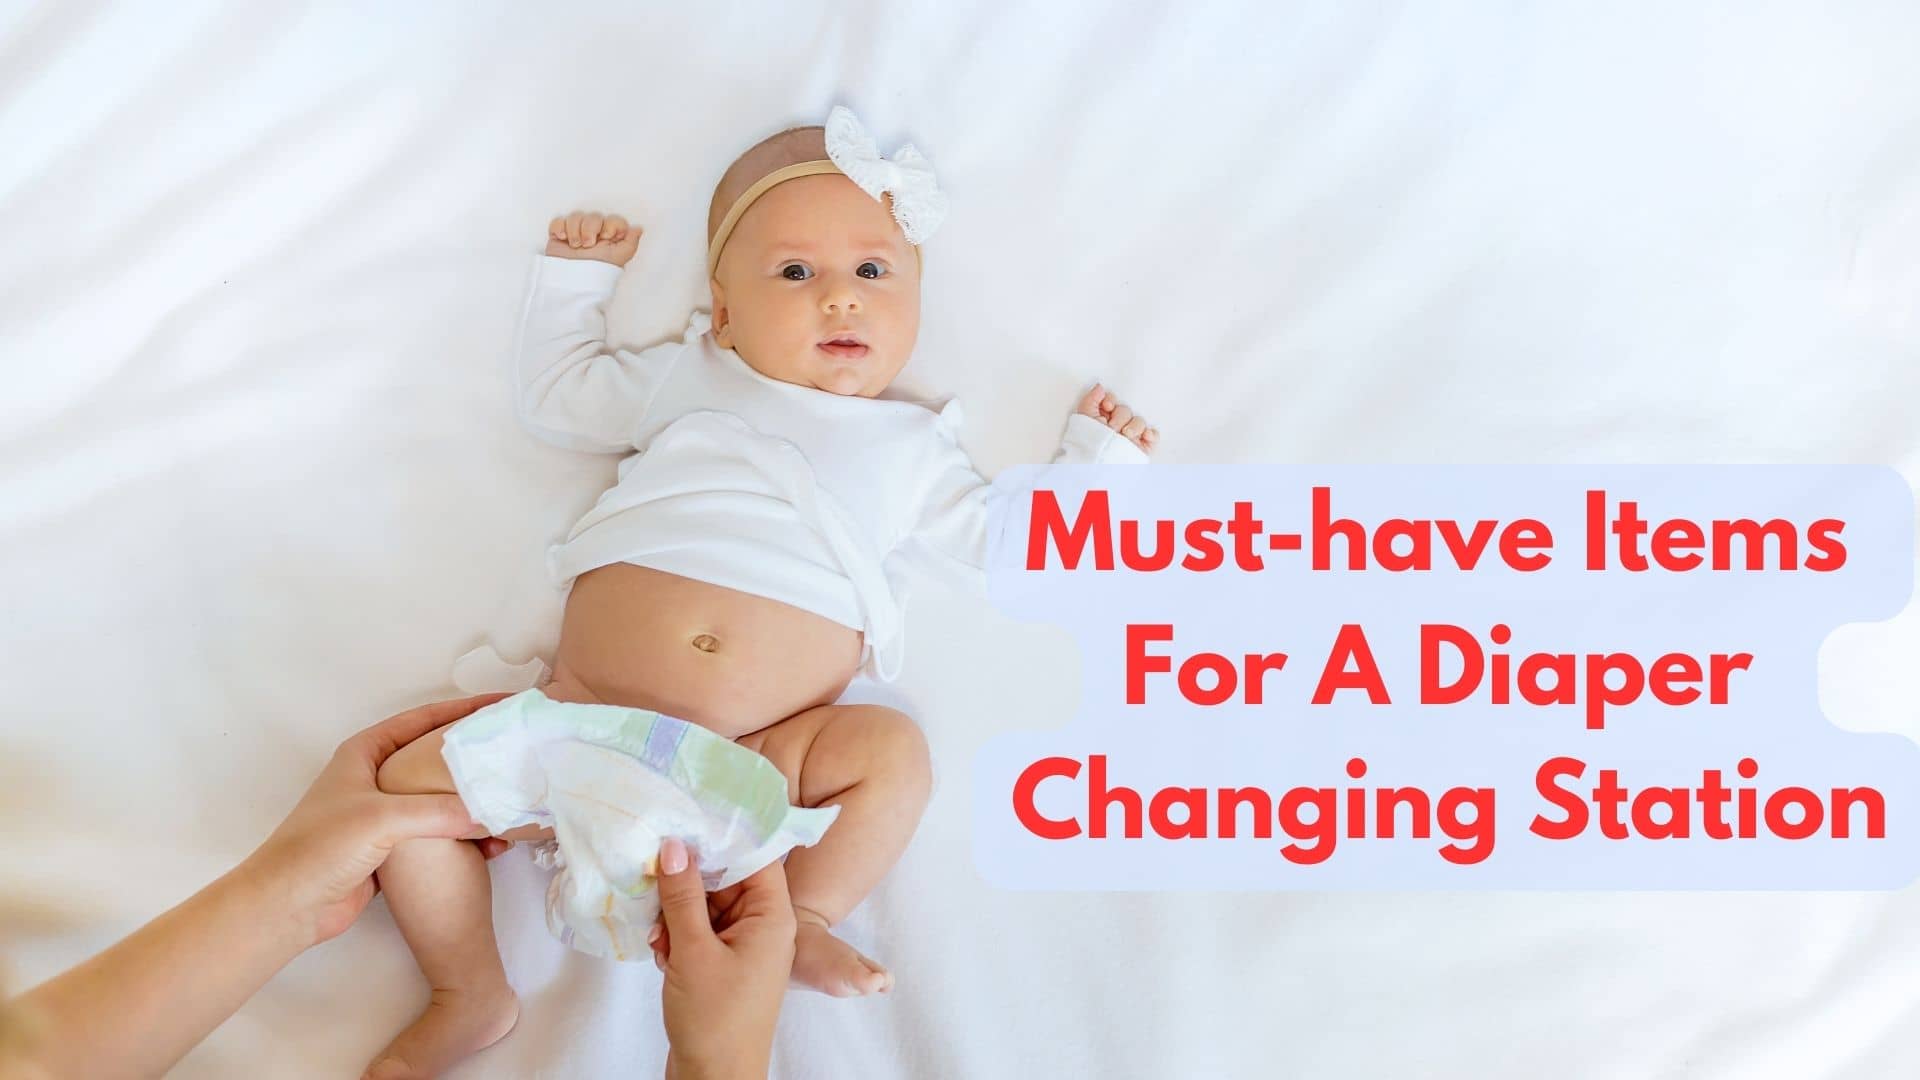 What Are Some Must-have Items For A Diaper Changing Station?